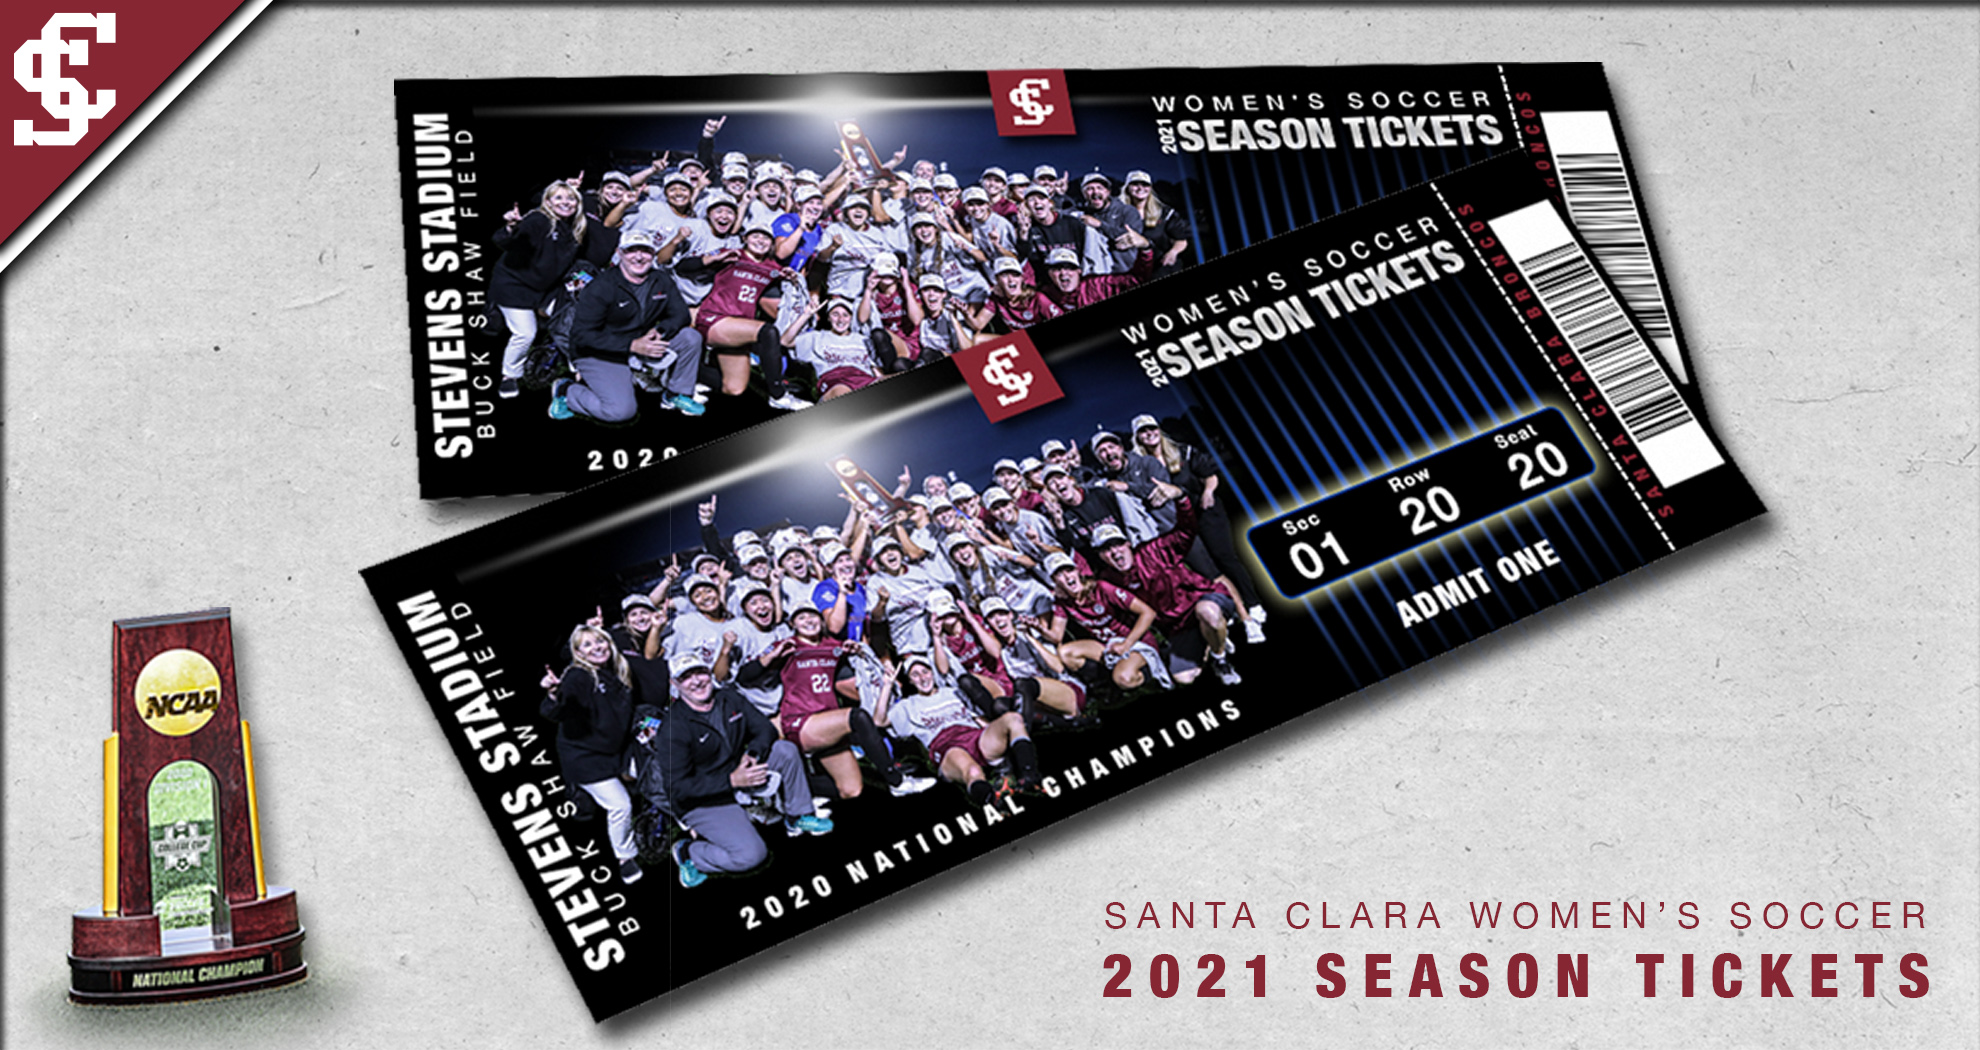 Reserve Your 2021 Women's Soccer Season Tickets Today